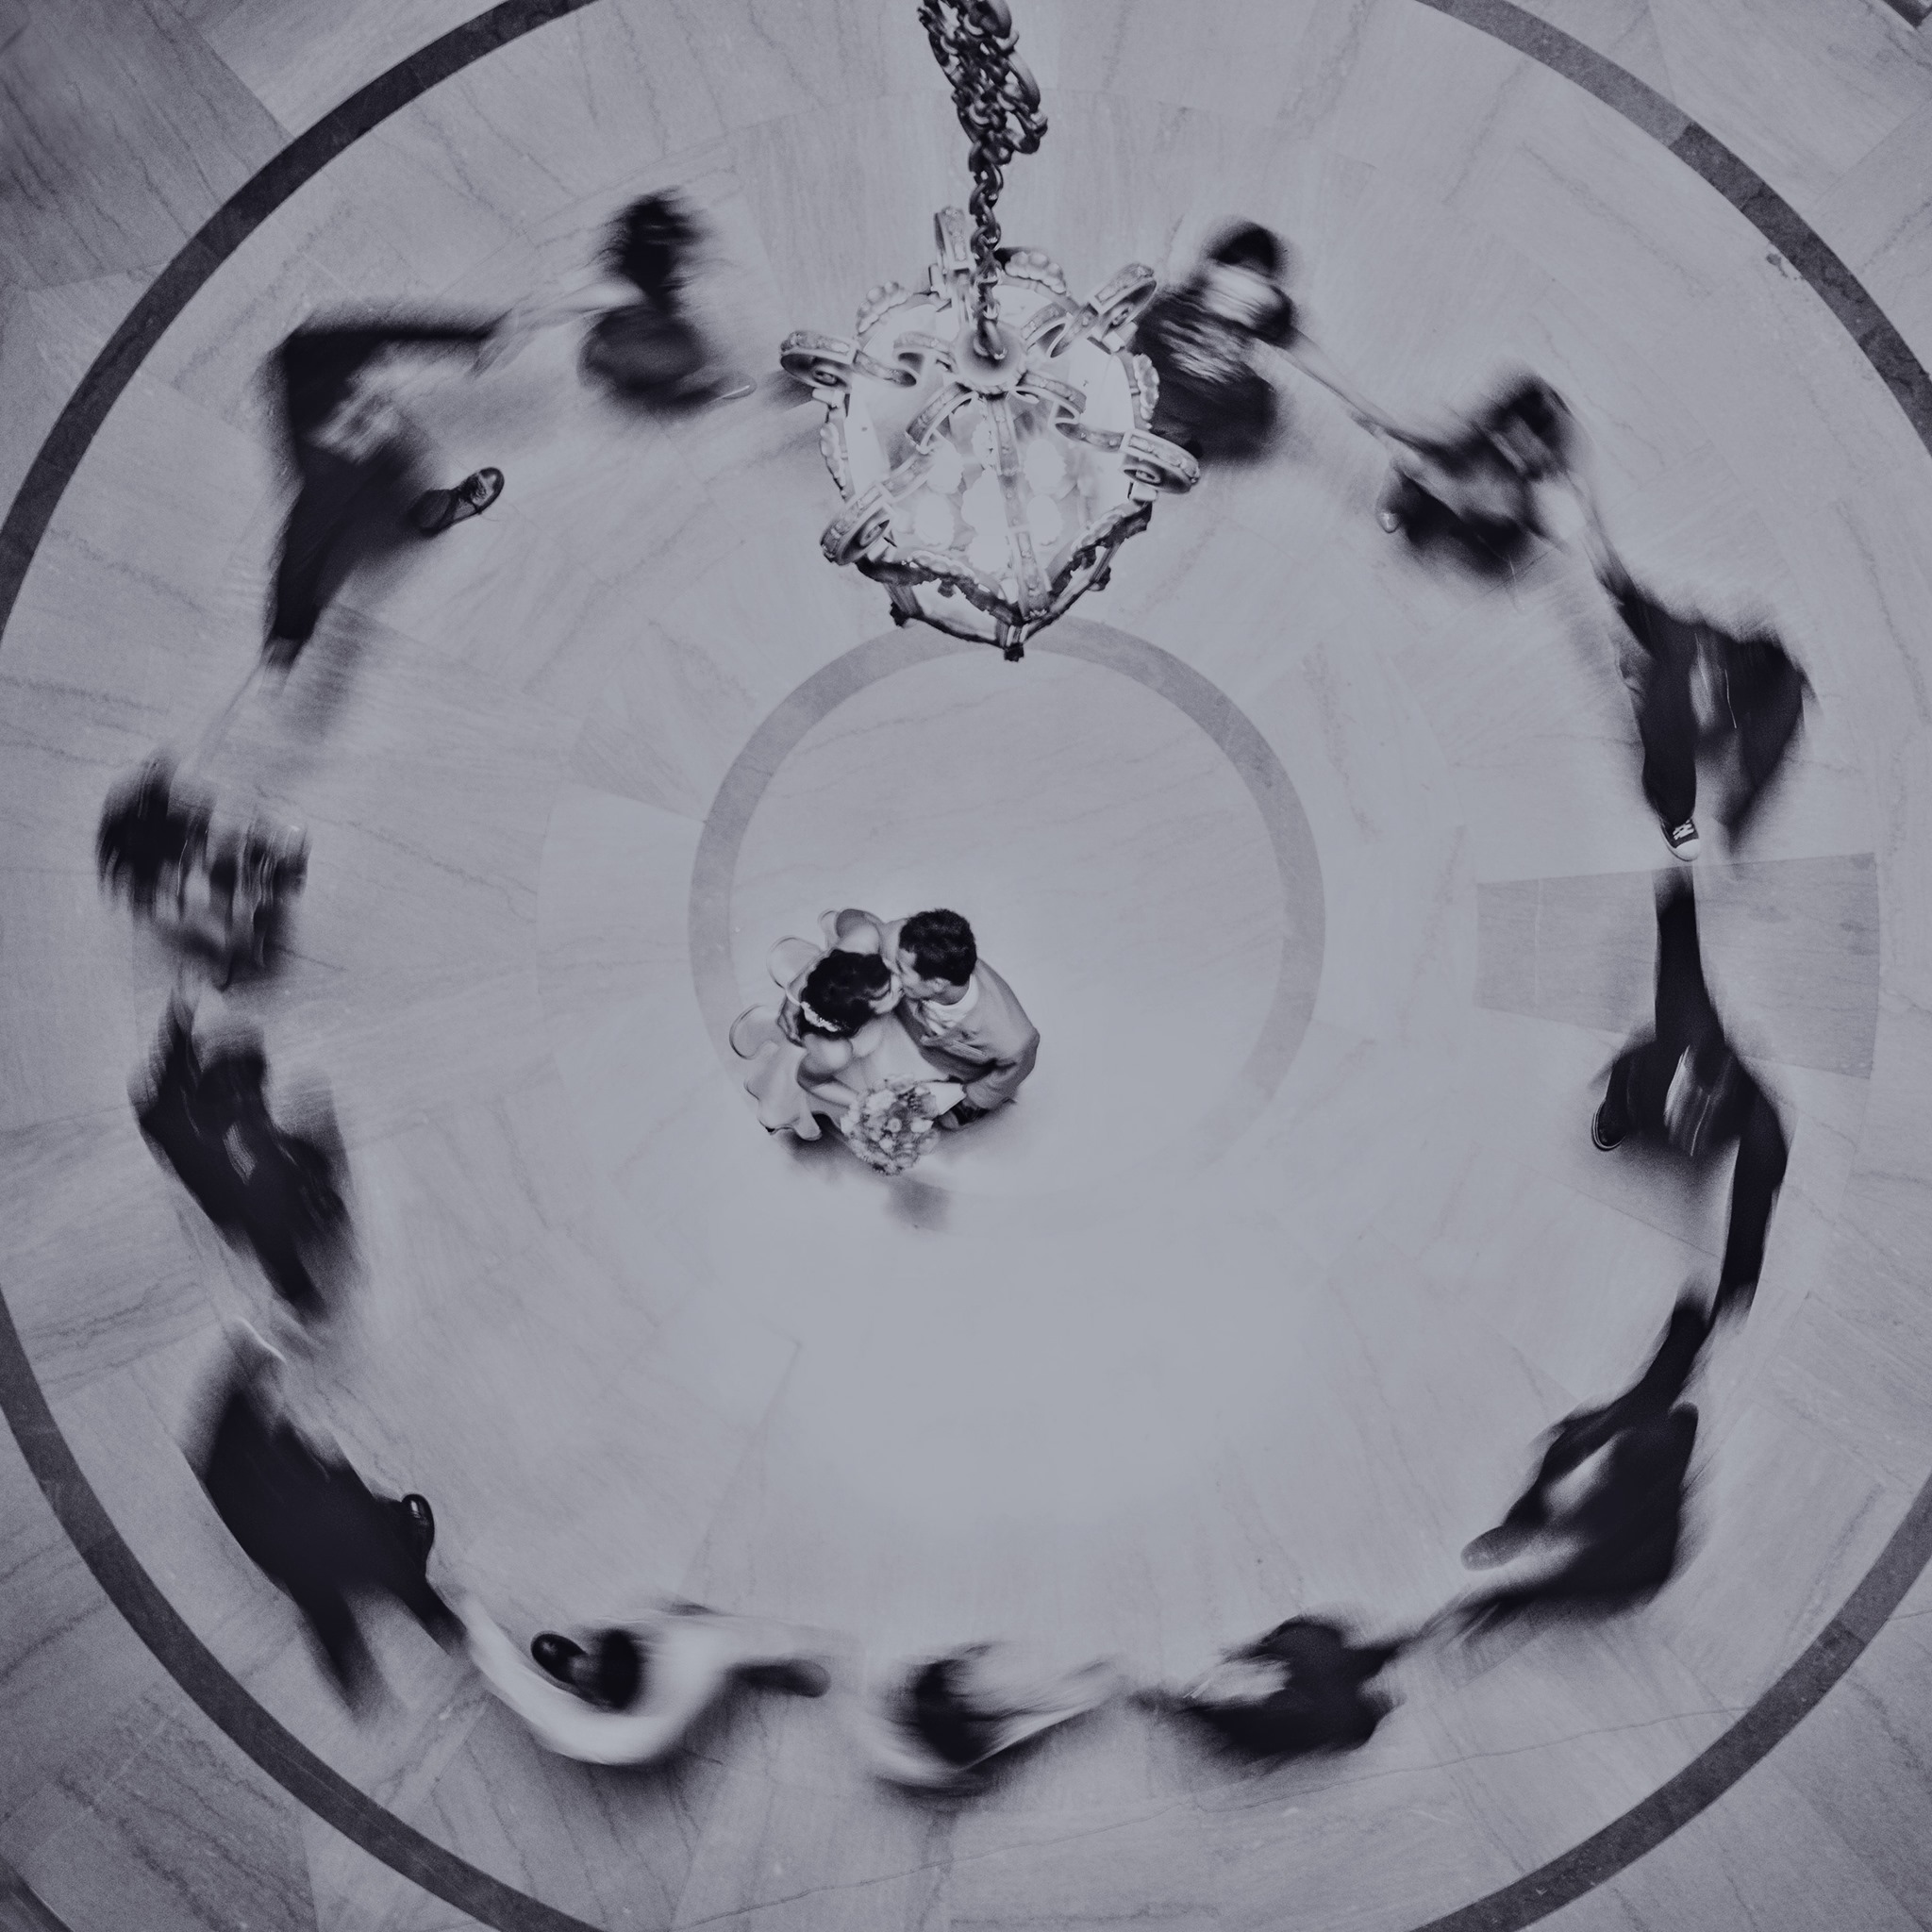 A bird eye's view of a couple dancing at the center of a circle created by the bridesmaid and groomsmen